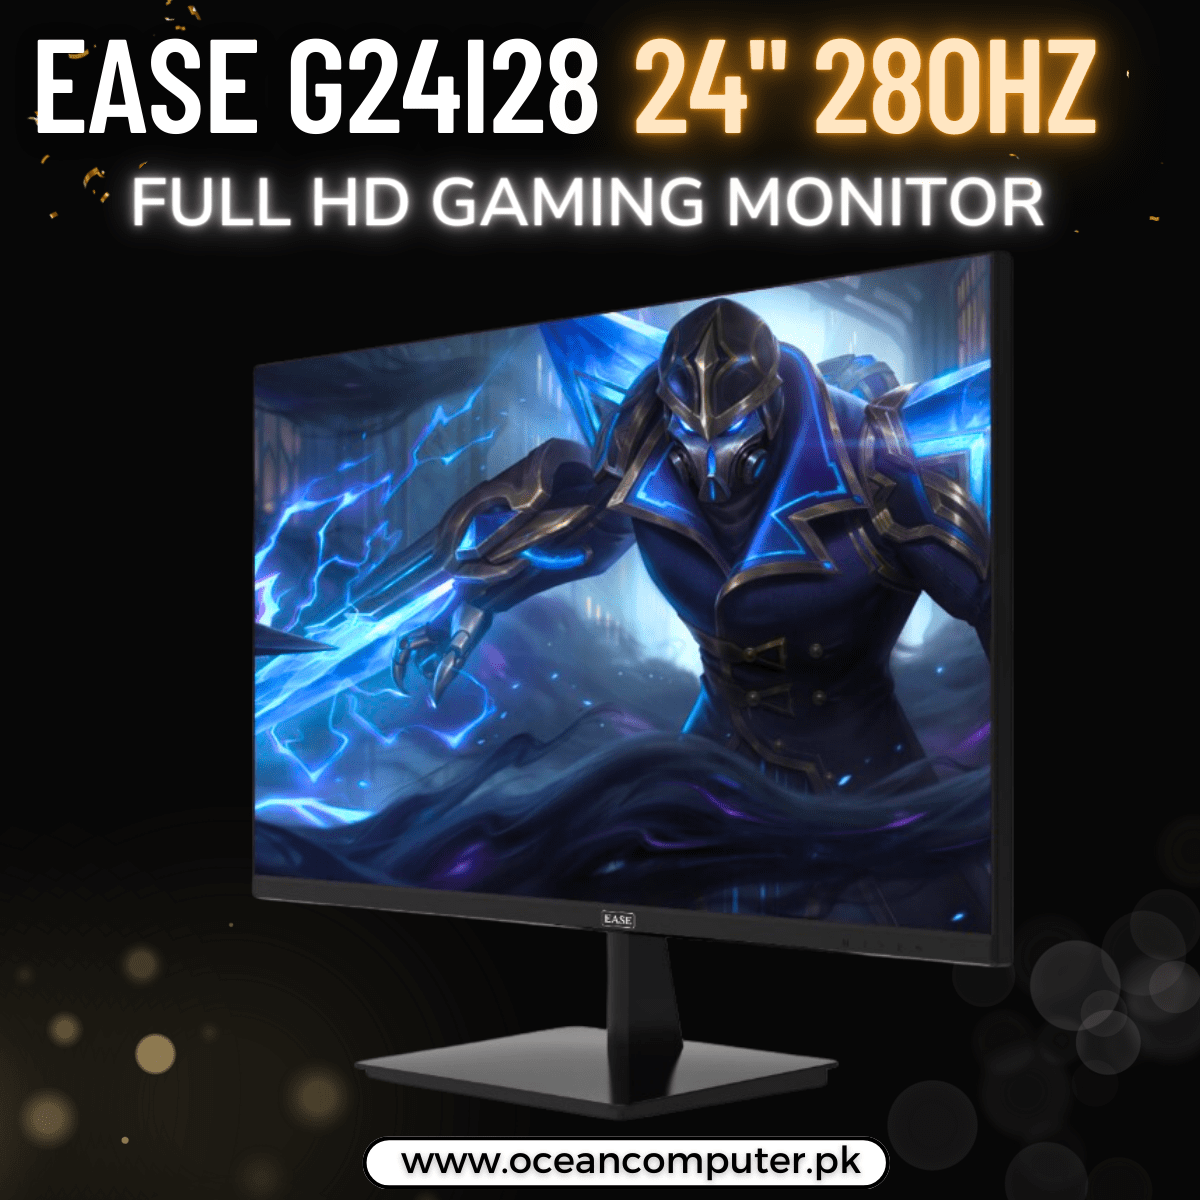 EASE O22V75 22″ Full HD Gaming Monitor Price In Pakistan (2)